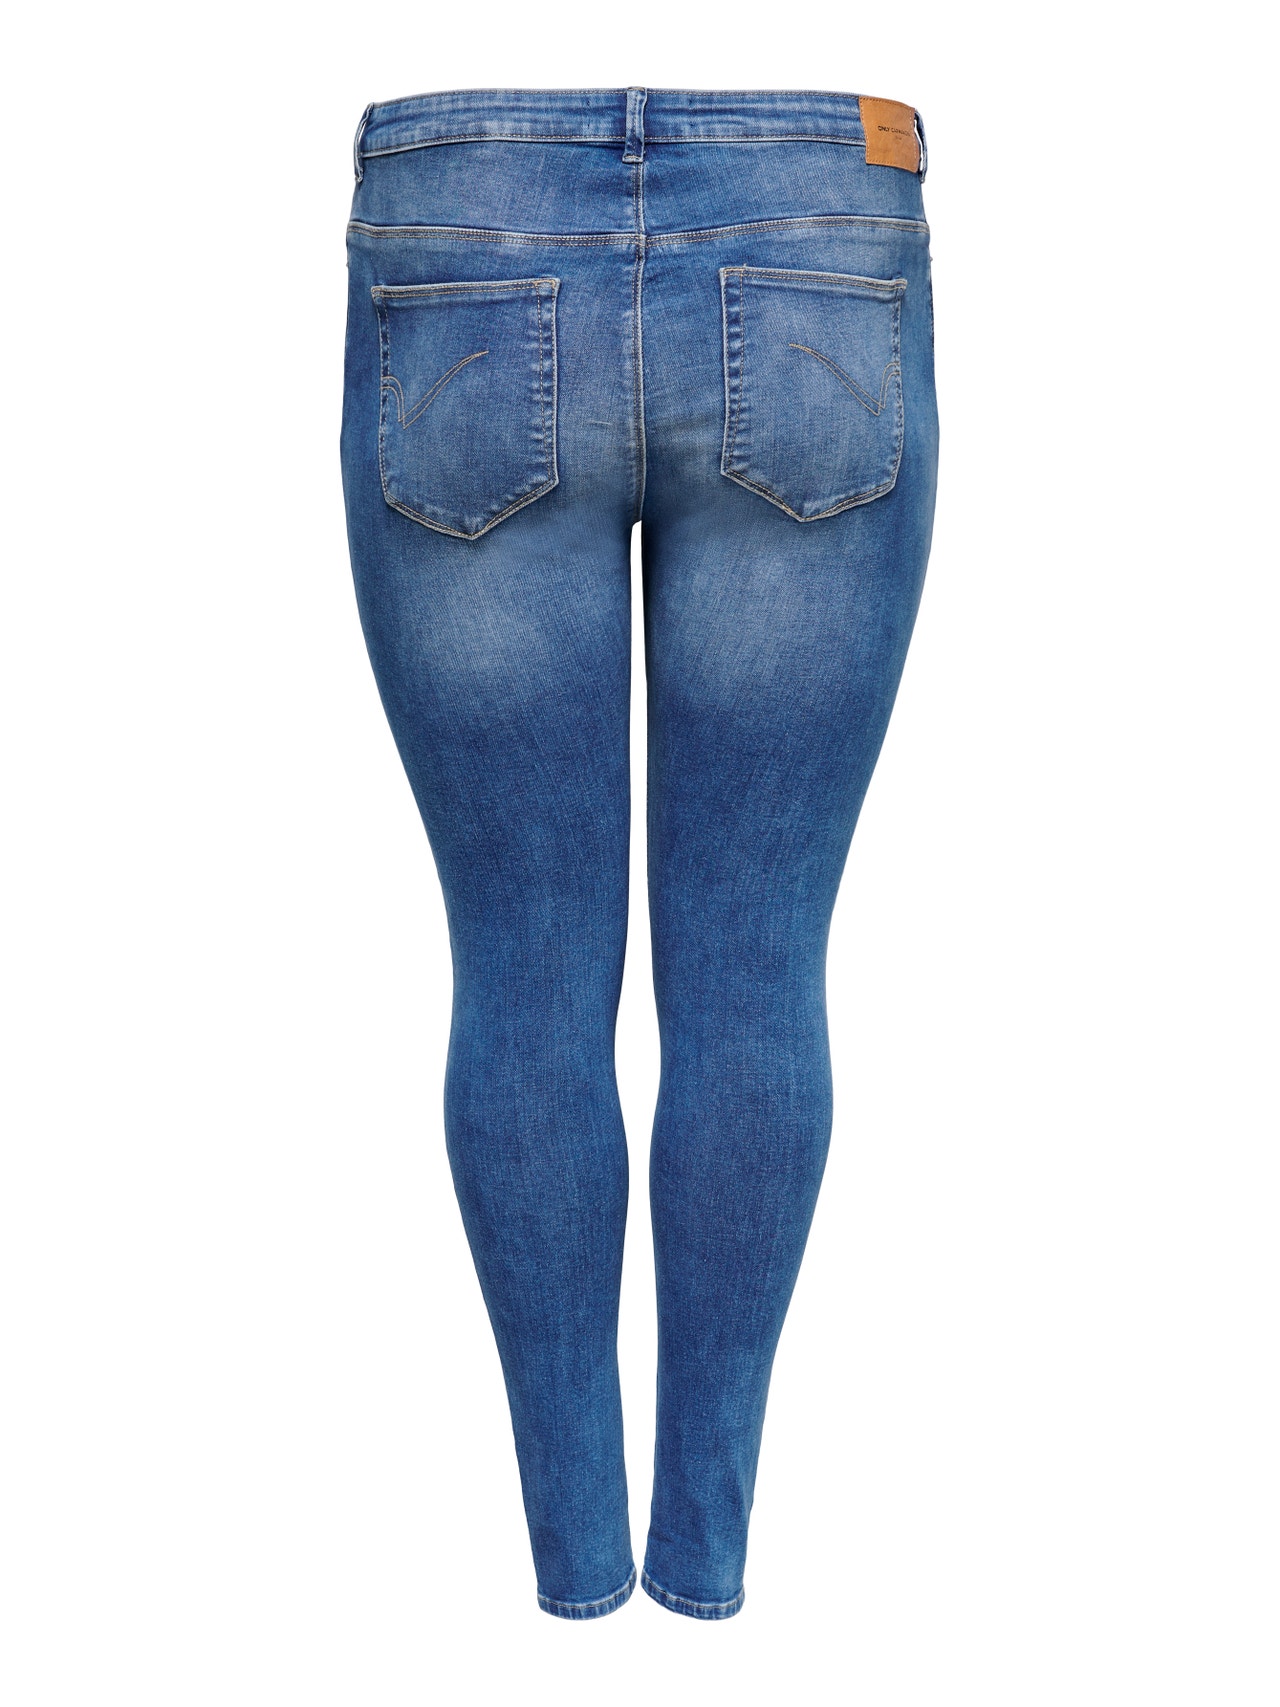 ONLY Skinny Fit Hohe Taille Jeans -Medium Blue Denim - 15227920